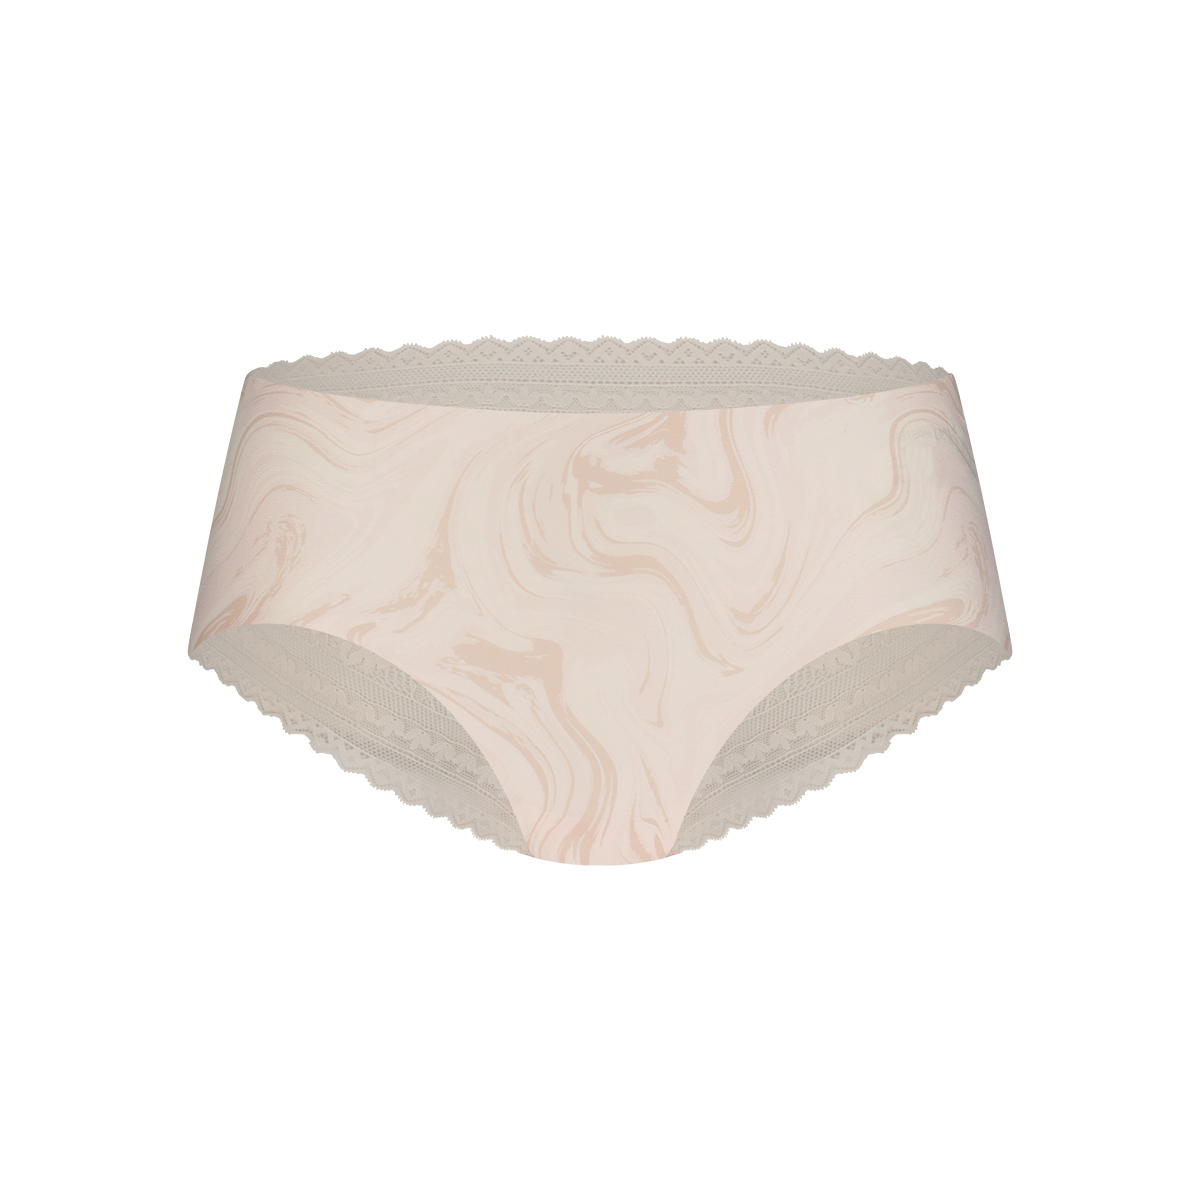 hipster met kant swirle soft pink maat S